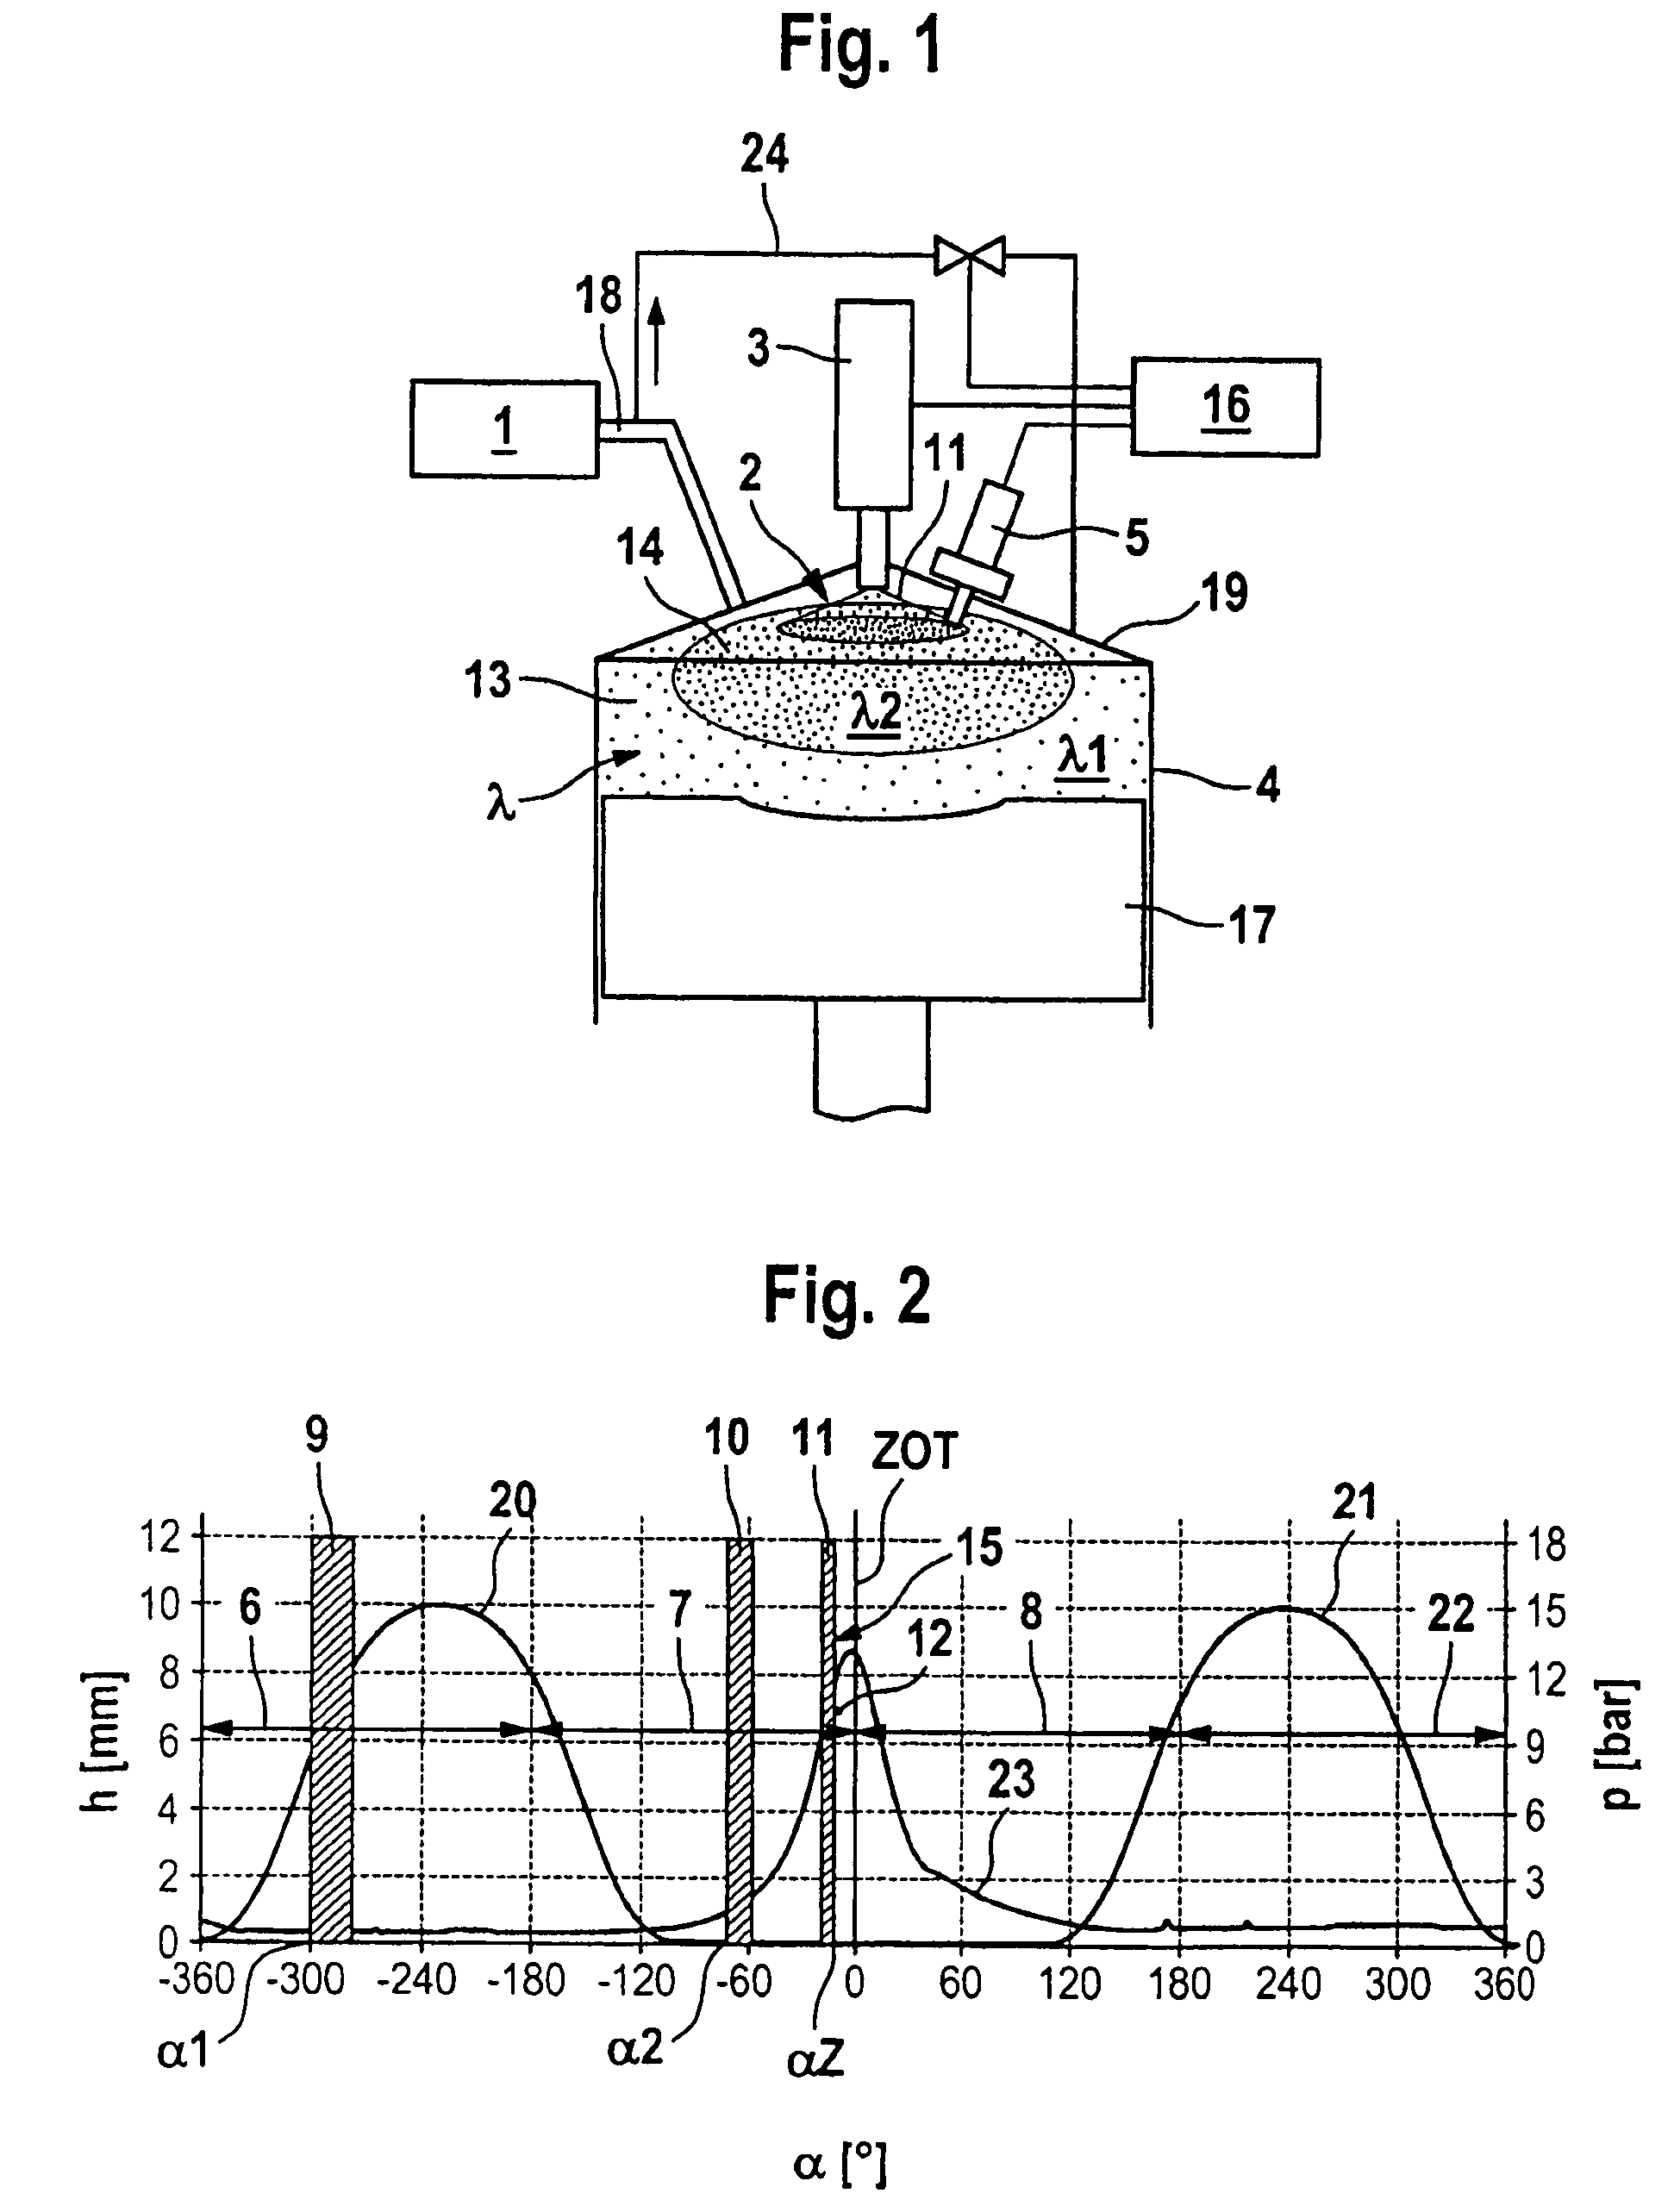 Method of operating a spark ignition internal combustion engine